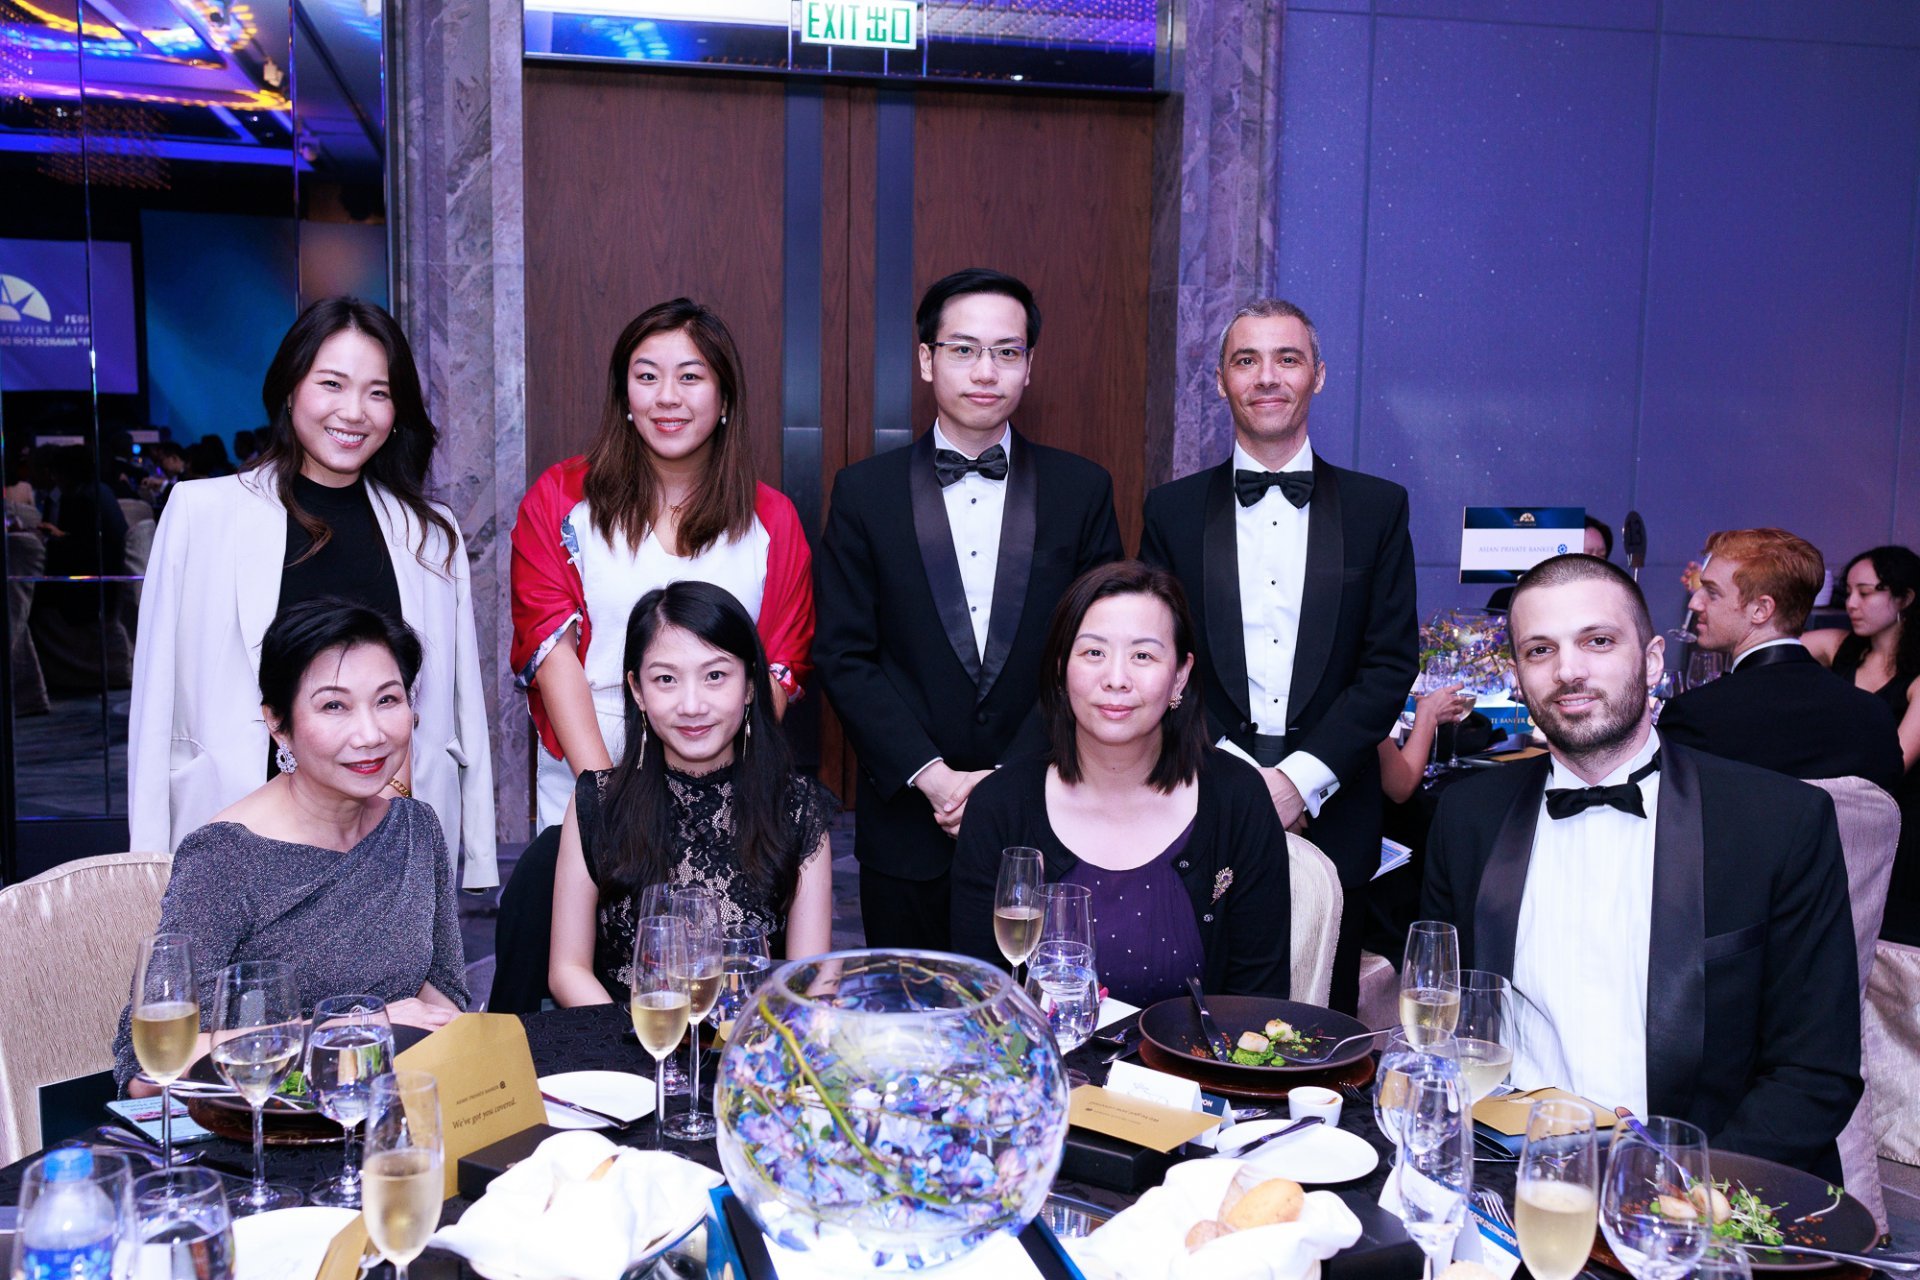 HSBC Global Private Banking at the Awards for Distinction dinner